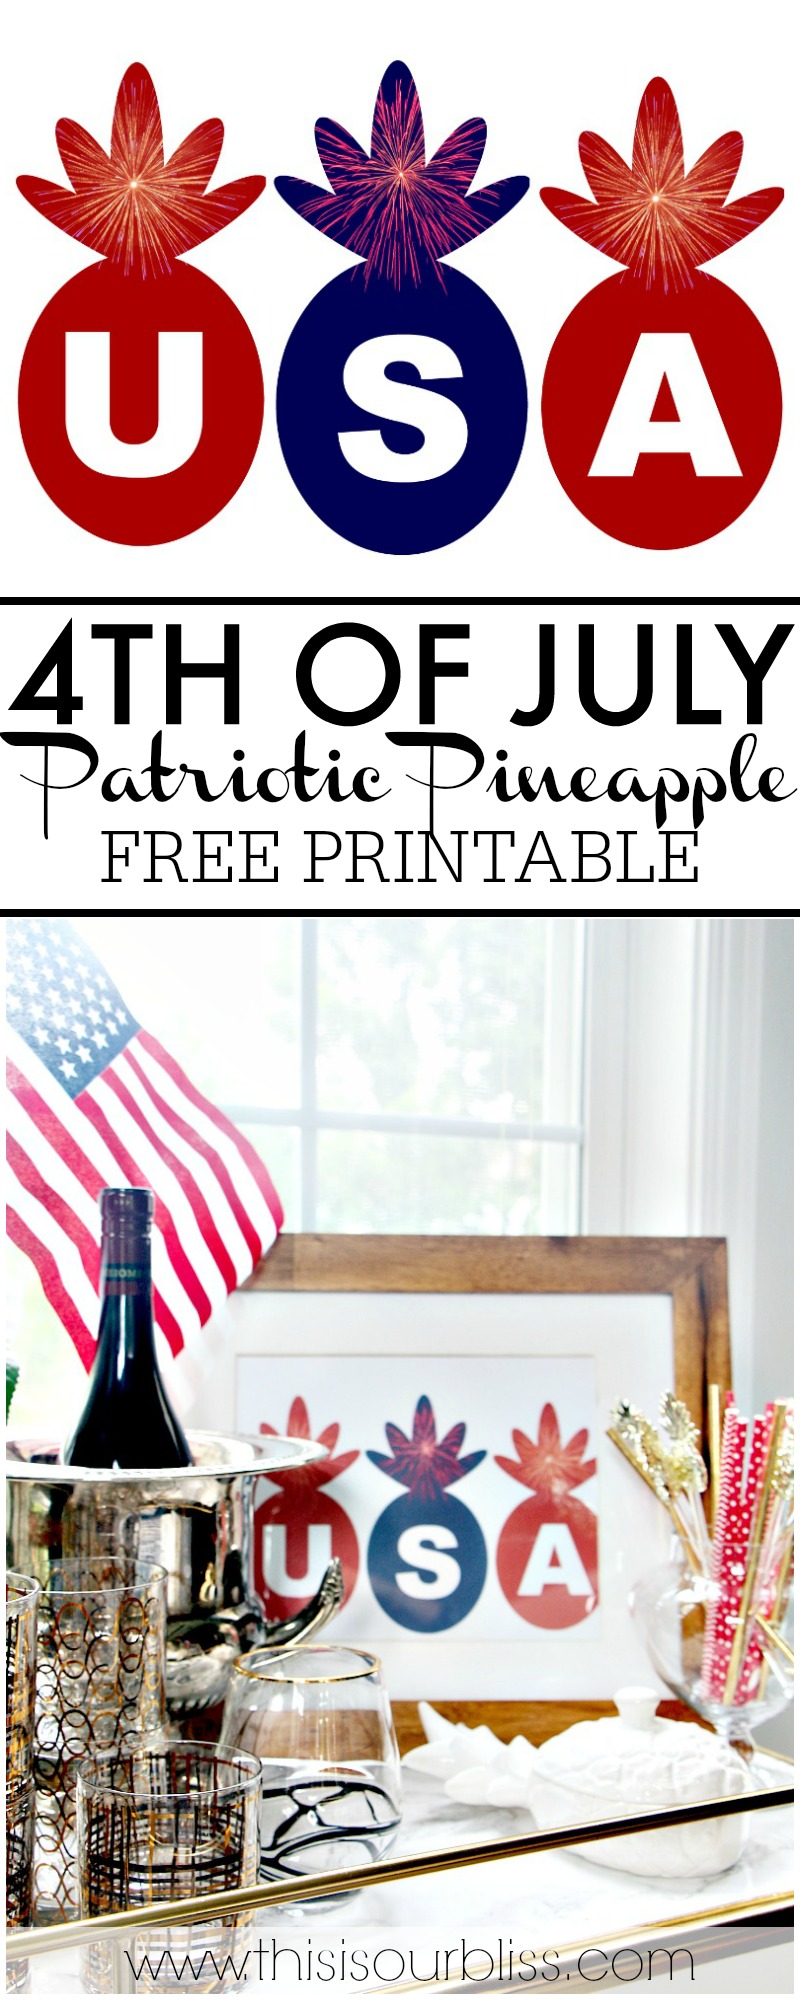 Red White & Blue USA Pineapple Art Printable | Seasonal Simplicity Summer Series | Free Printable - USA Pineapple Art | This is our Bliss